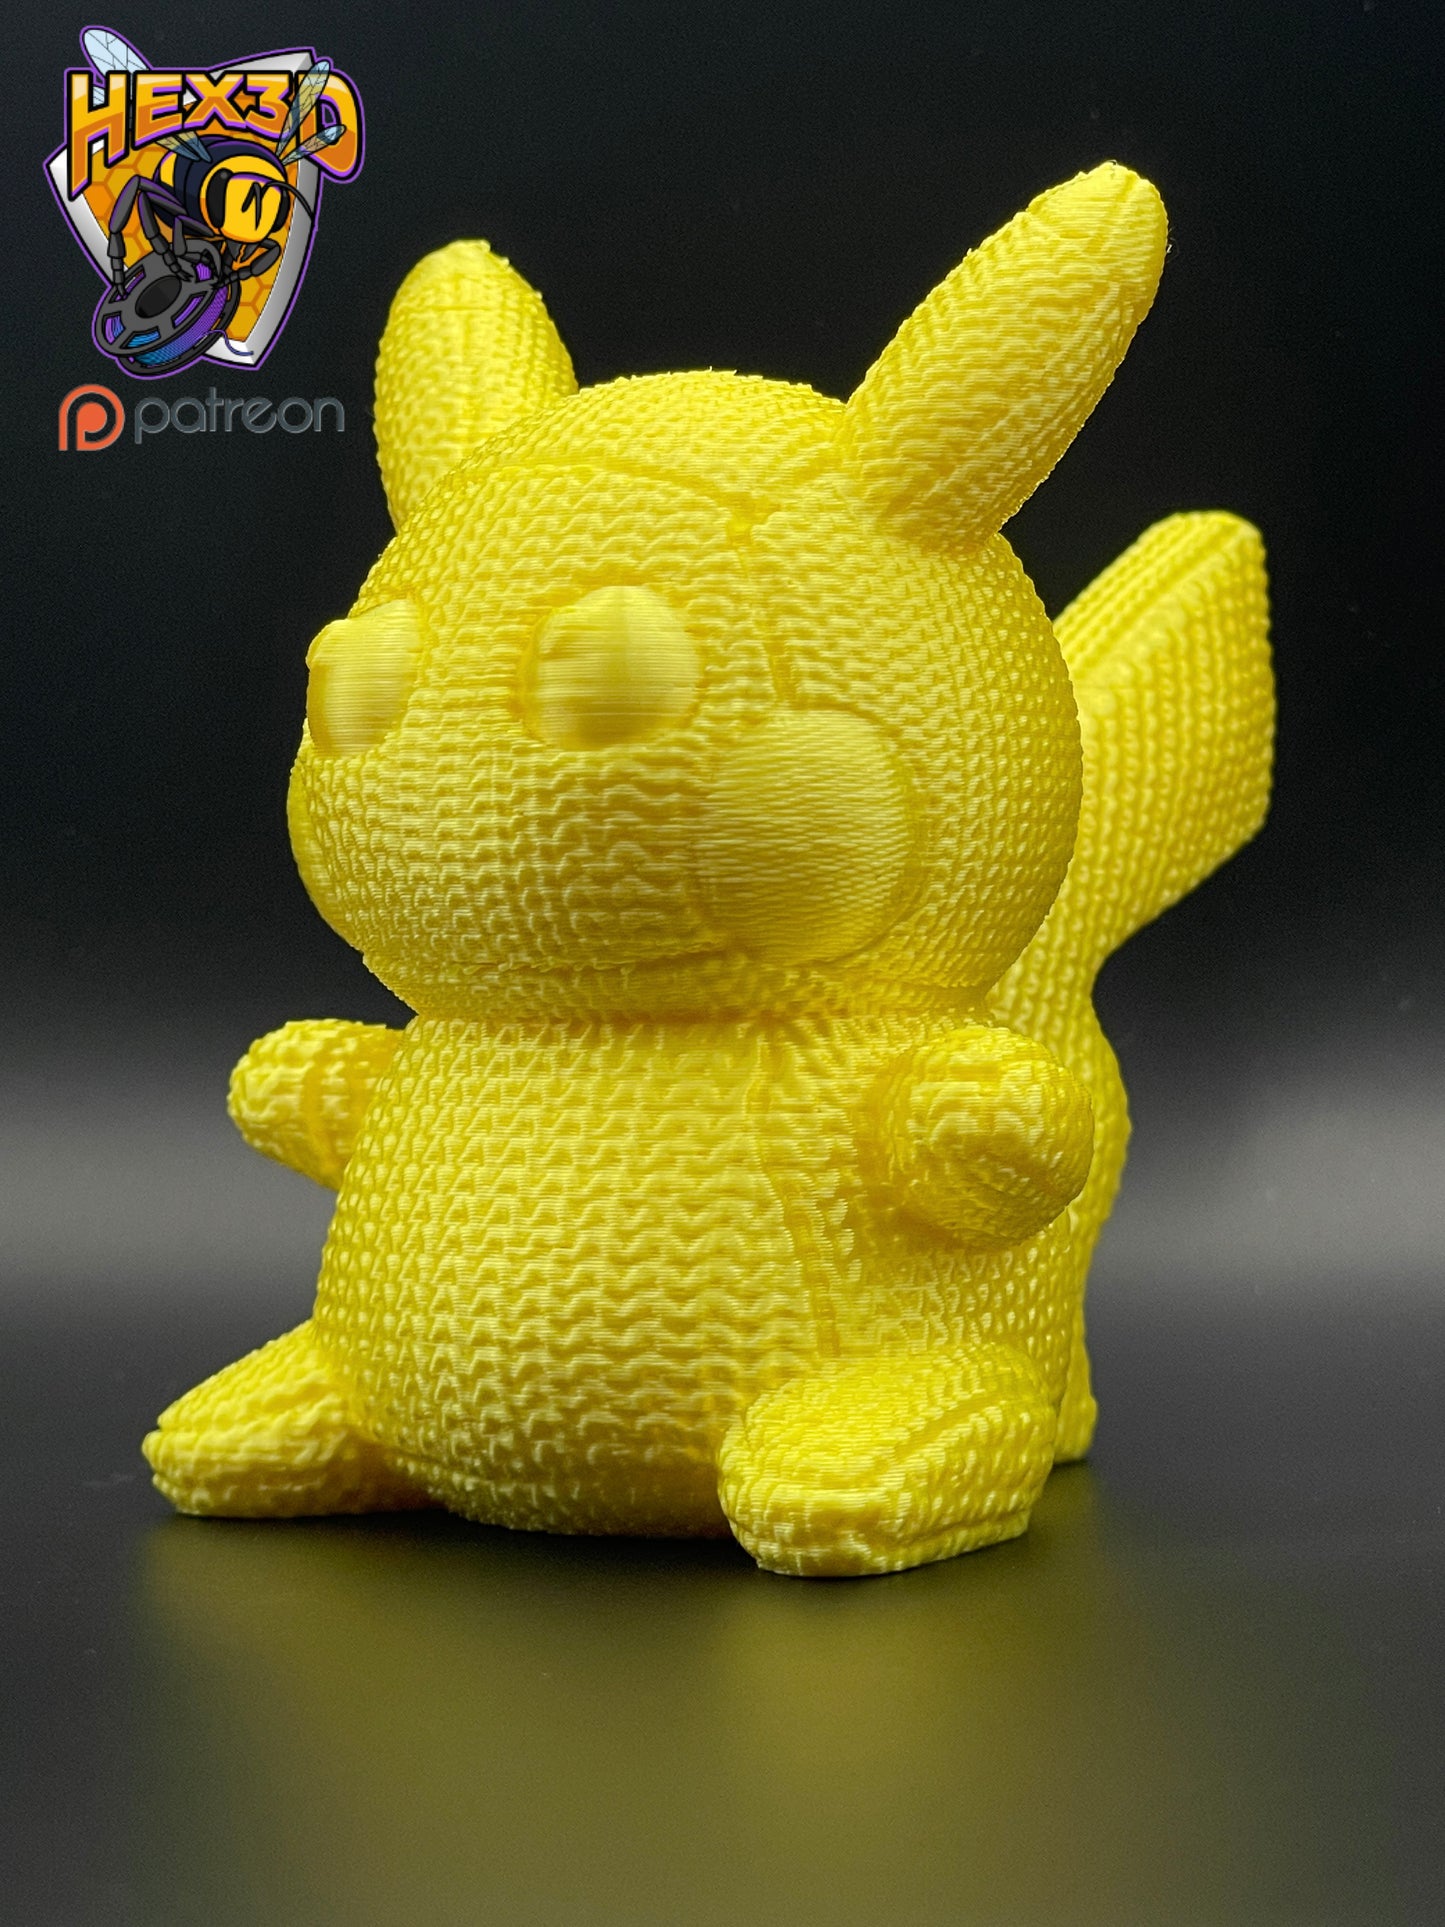 "Knitted" Pikachu by Hex3D